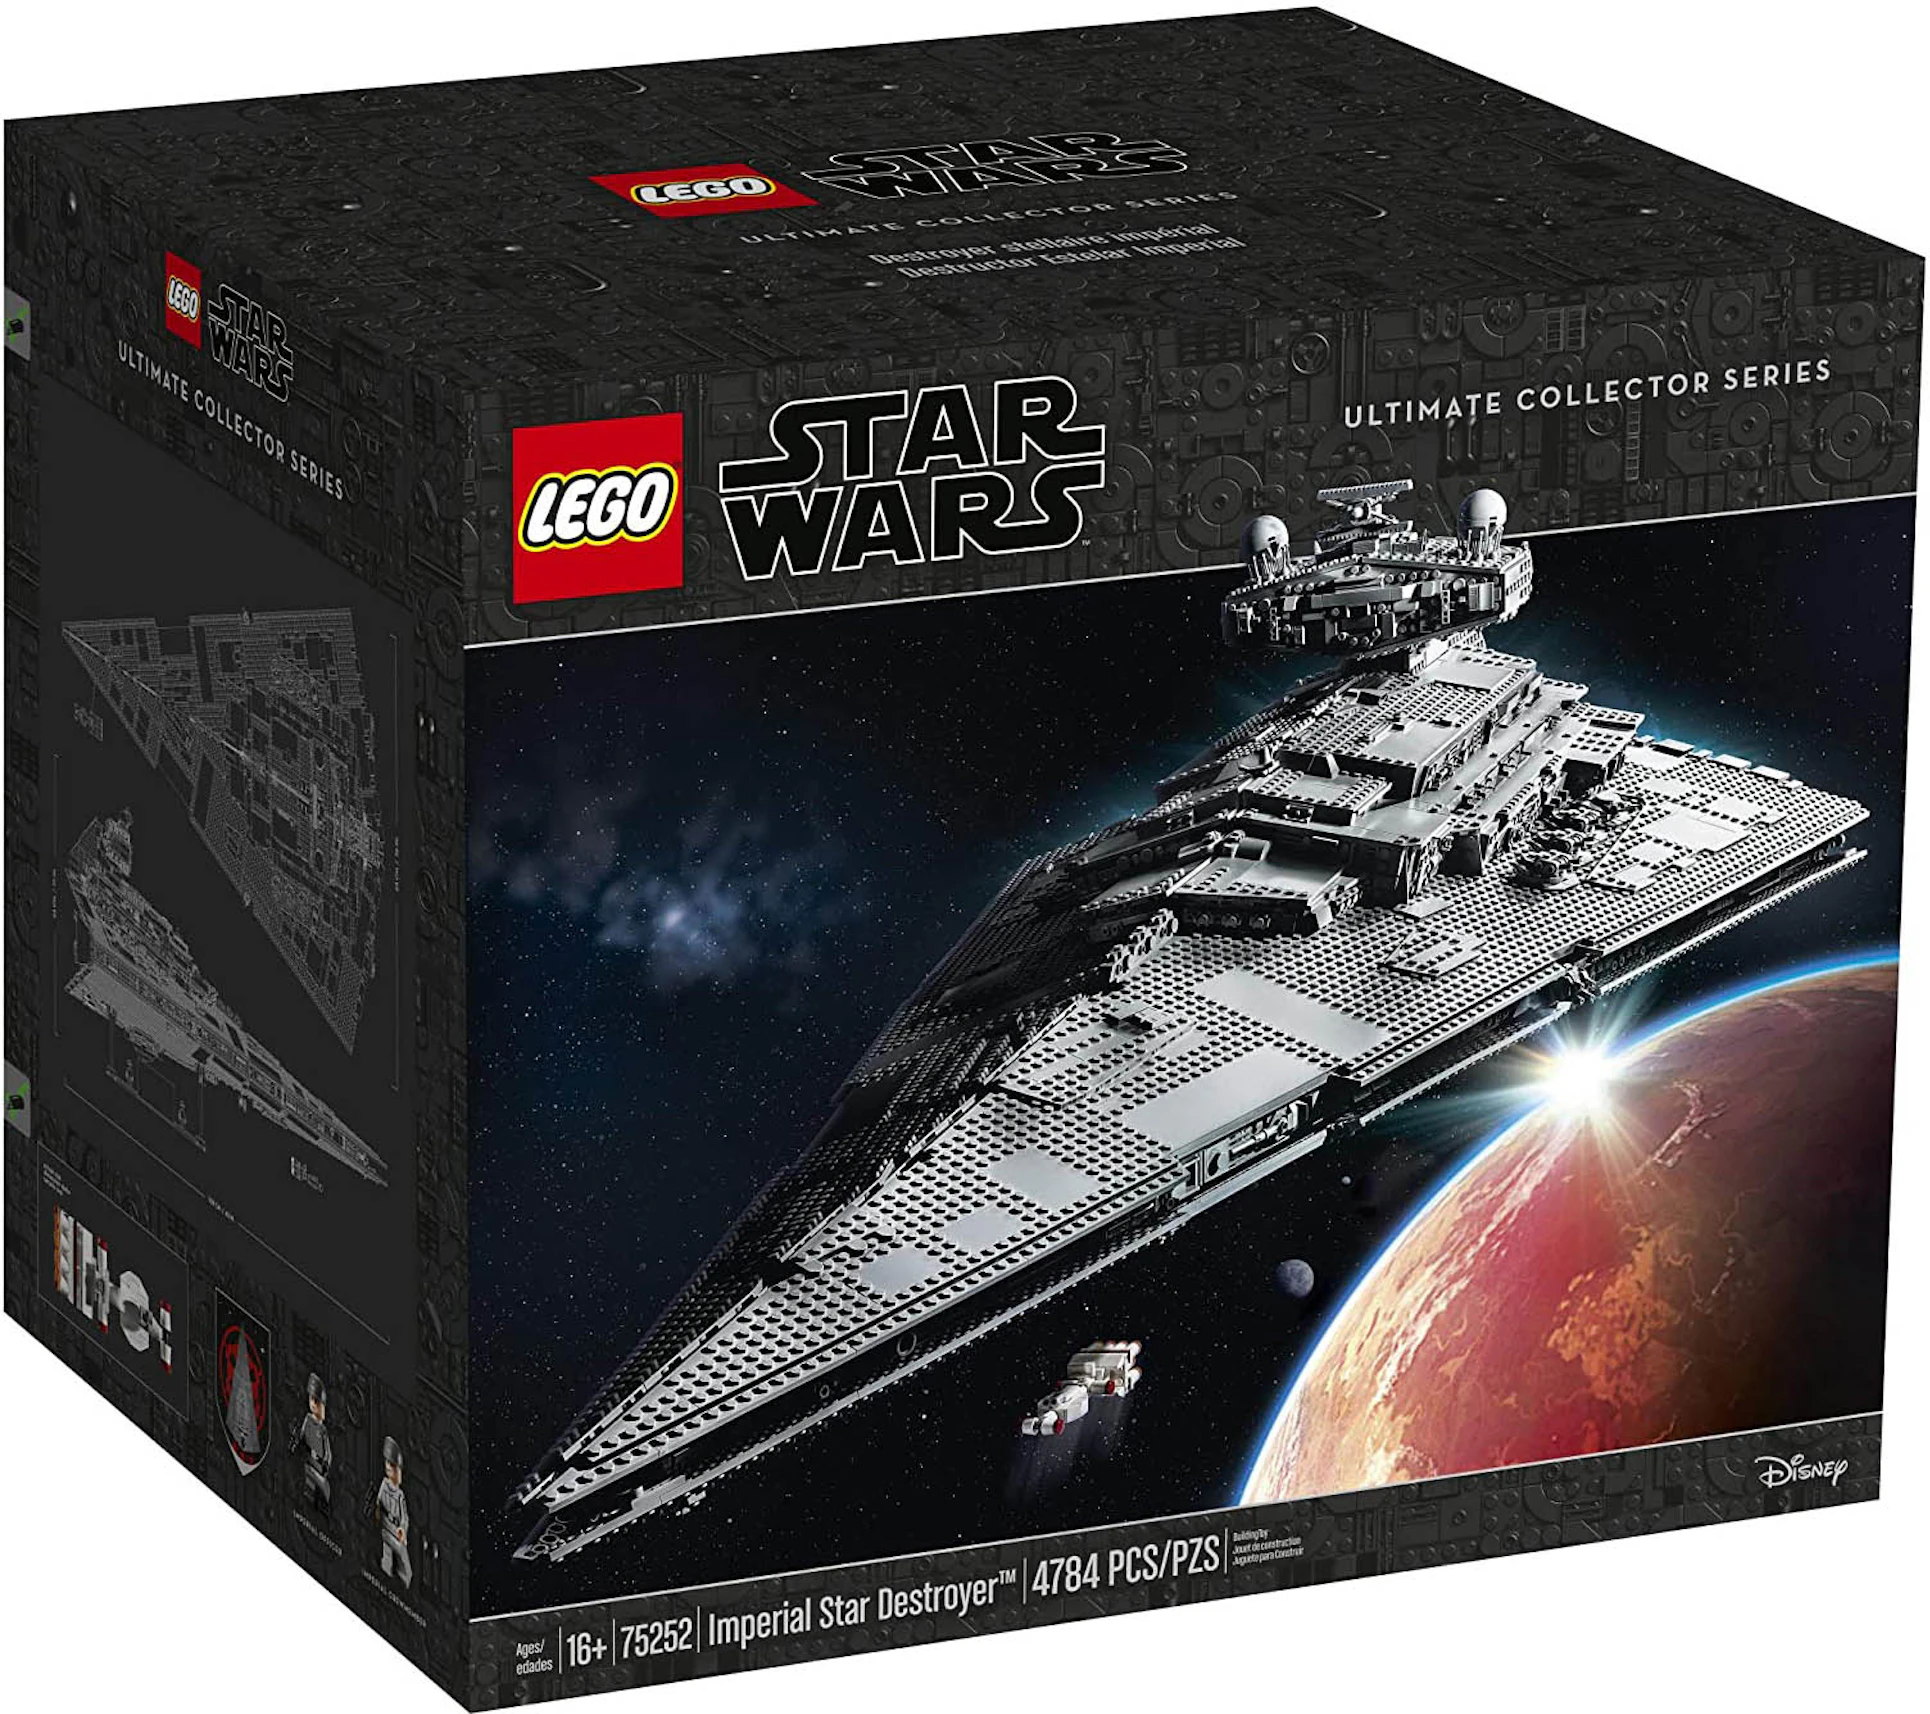 LEGO Star Wars Imperial Star Destroyer Ultimate Collector Series Set 75252  - US